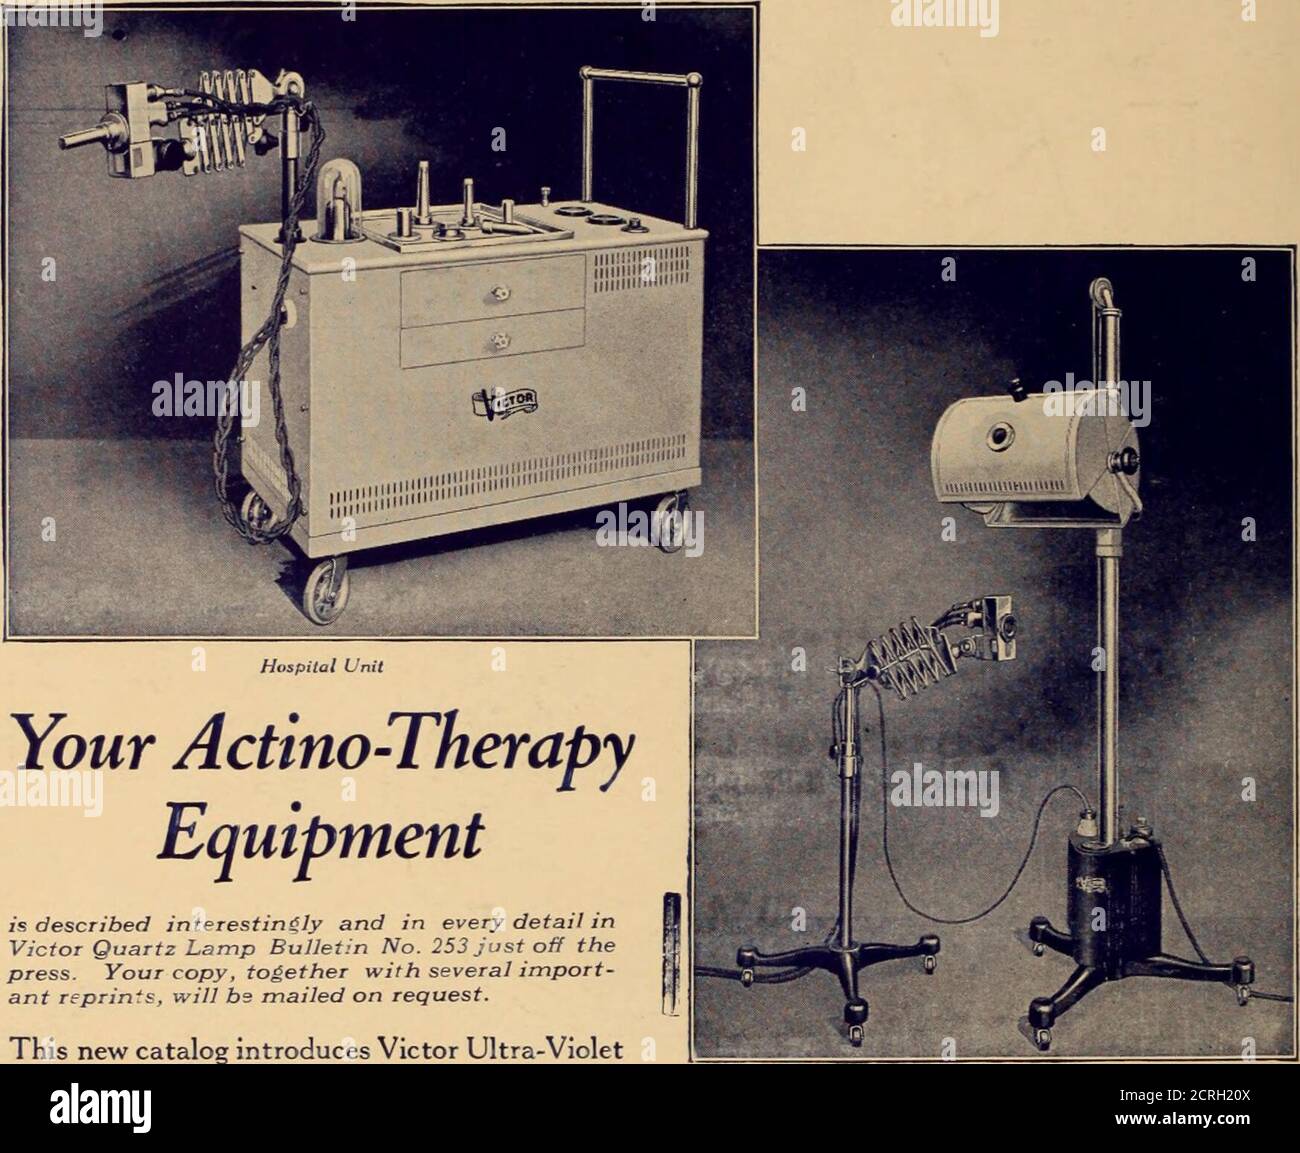 . Journal of radiology . Your Actino-TherapyEquipment is described interestingly and in every detail inVictor Quartz Lamp Bulletin No. 253 just off thepress. Your copy, together with several import-ant reprints, will bs mailed on request. This new catalog introduces Victor Ultra-VioletLamps, the most recent addition to the Victorline of Electro-Medical apparatus. These lampsare the well-known Burdick Models, embodyingadvanced ideas in electrical and mechanicaldesign and construction. Actino-Therapy has created a wide interest inthe medical sciences, and the increasing demandfor equipment is an Stock Photo